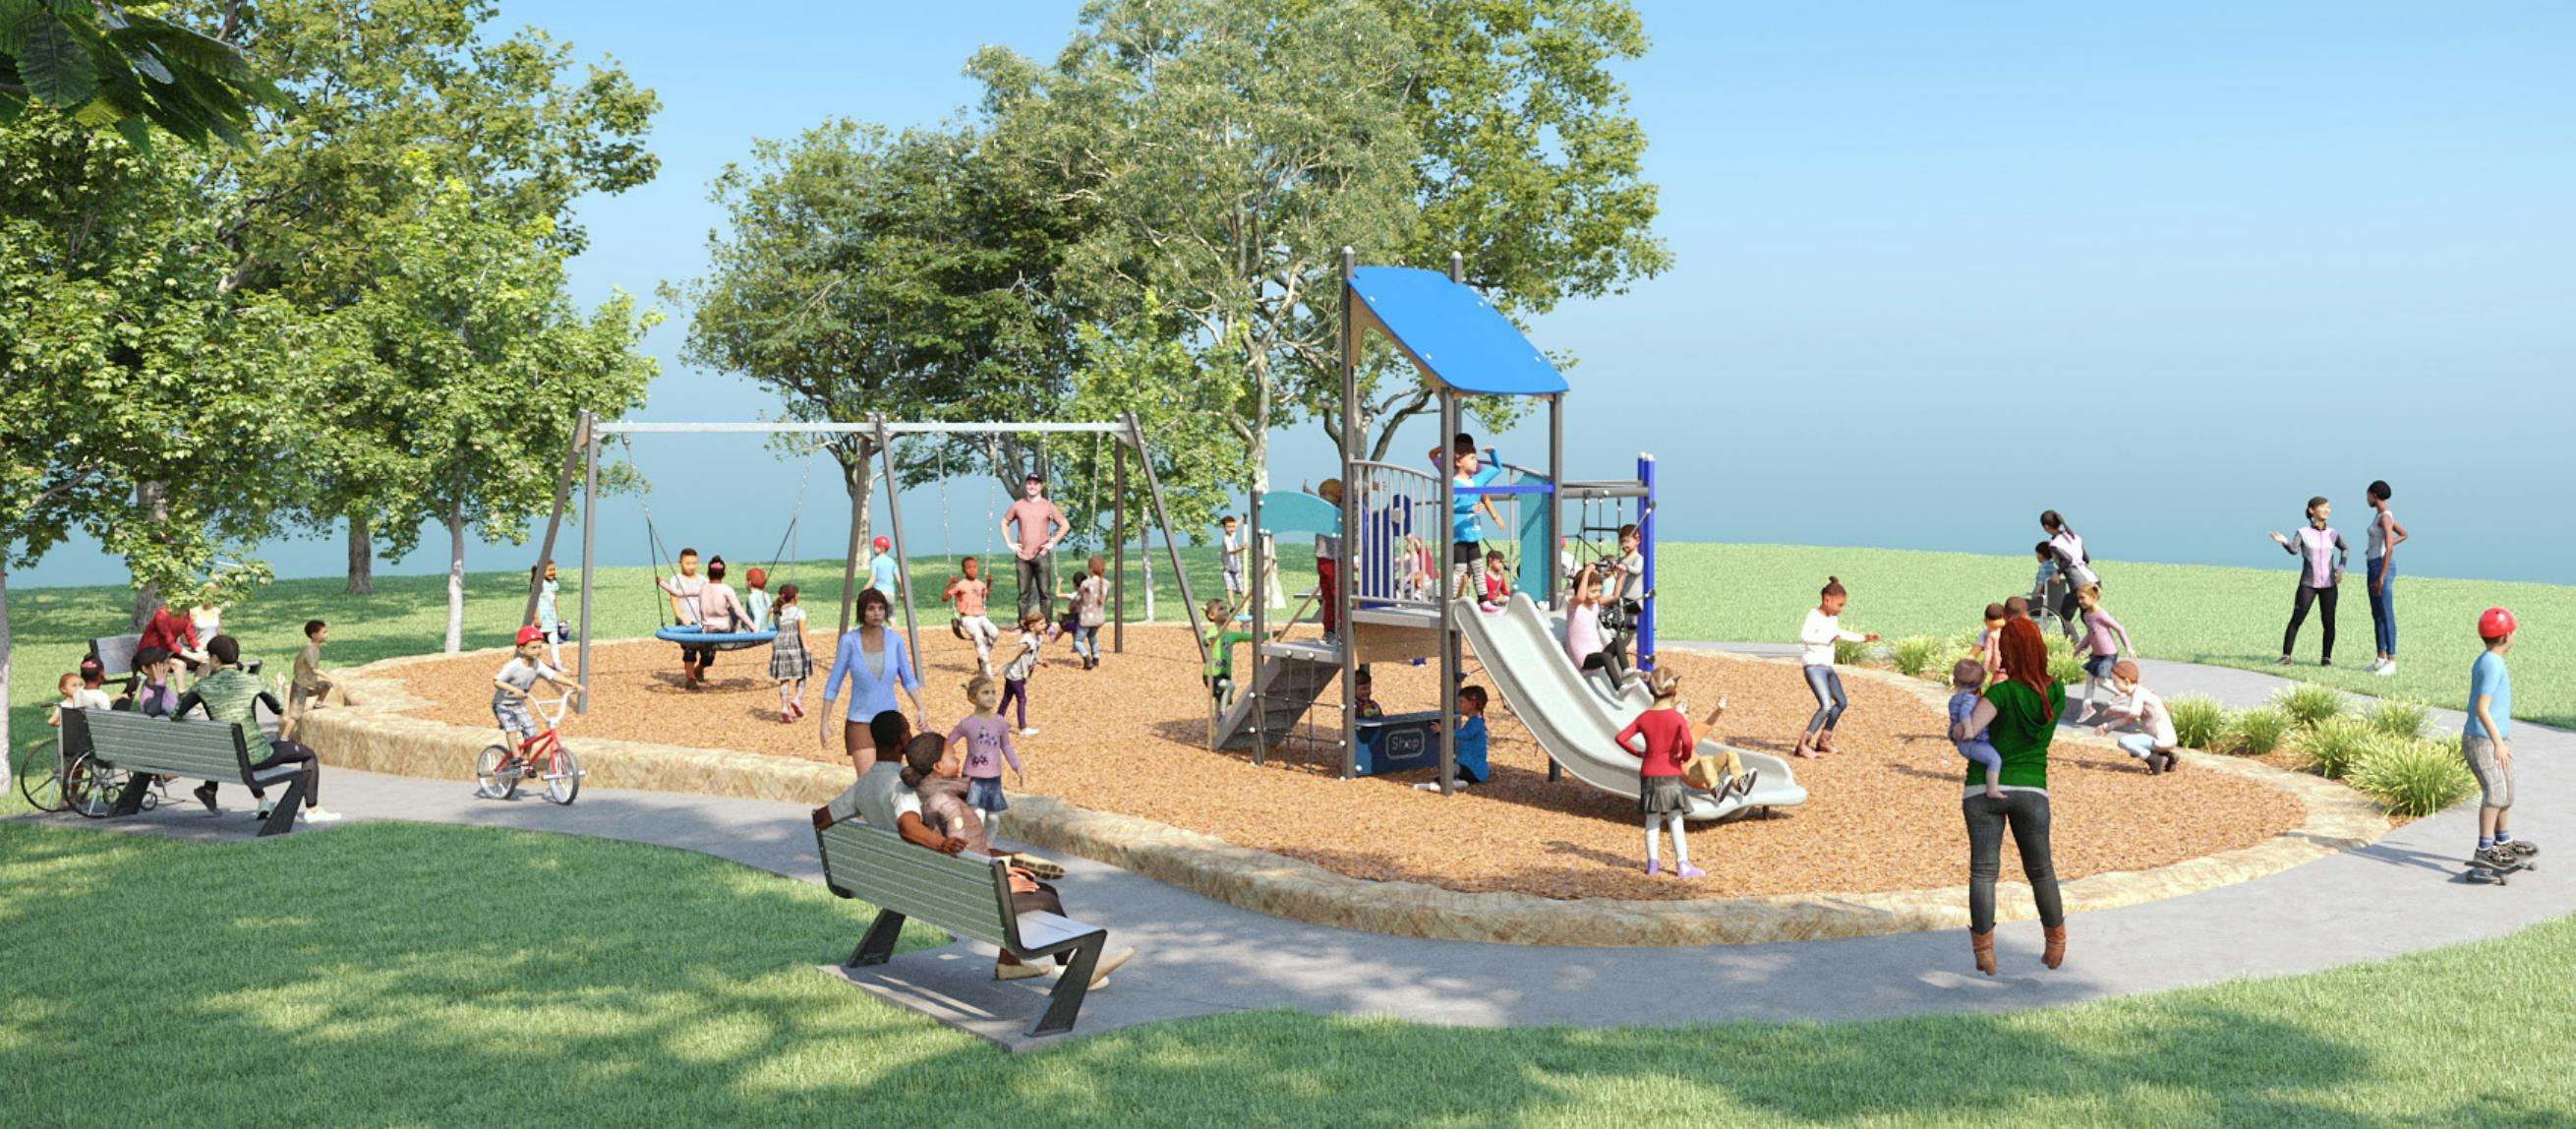 Artist impression: Example of what a renewed local playground may look like